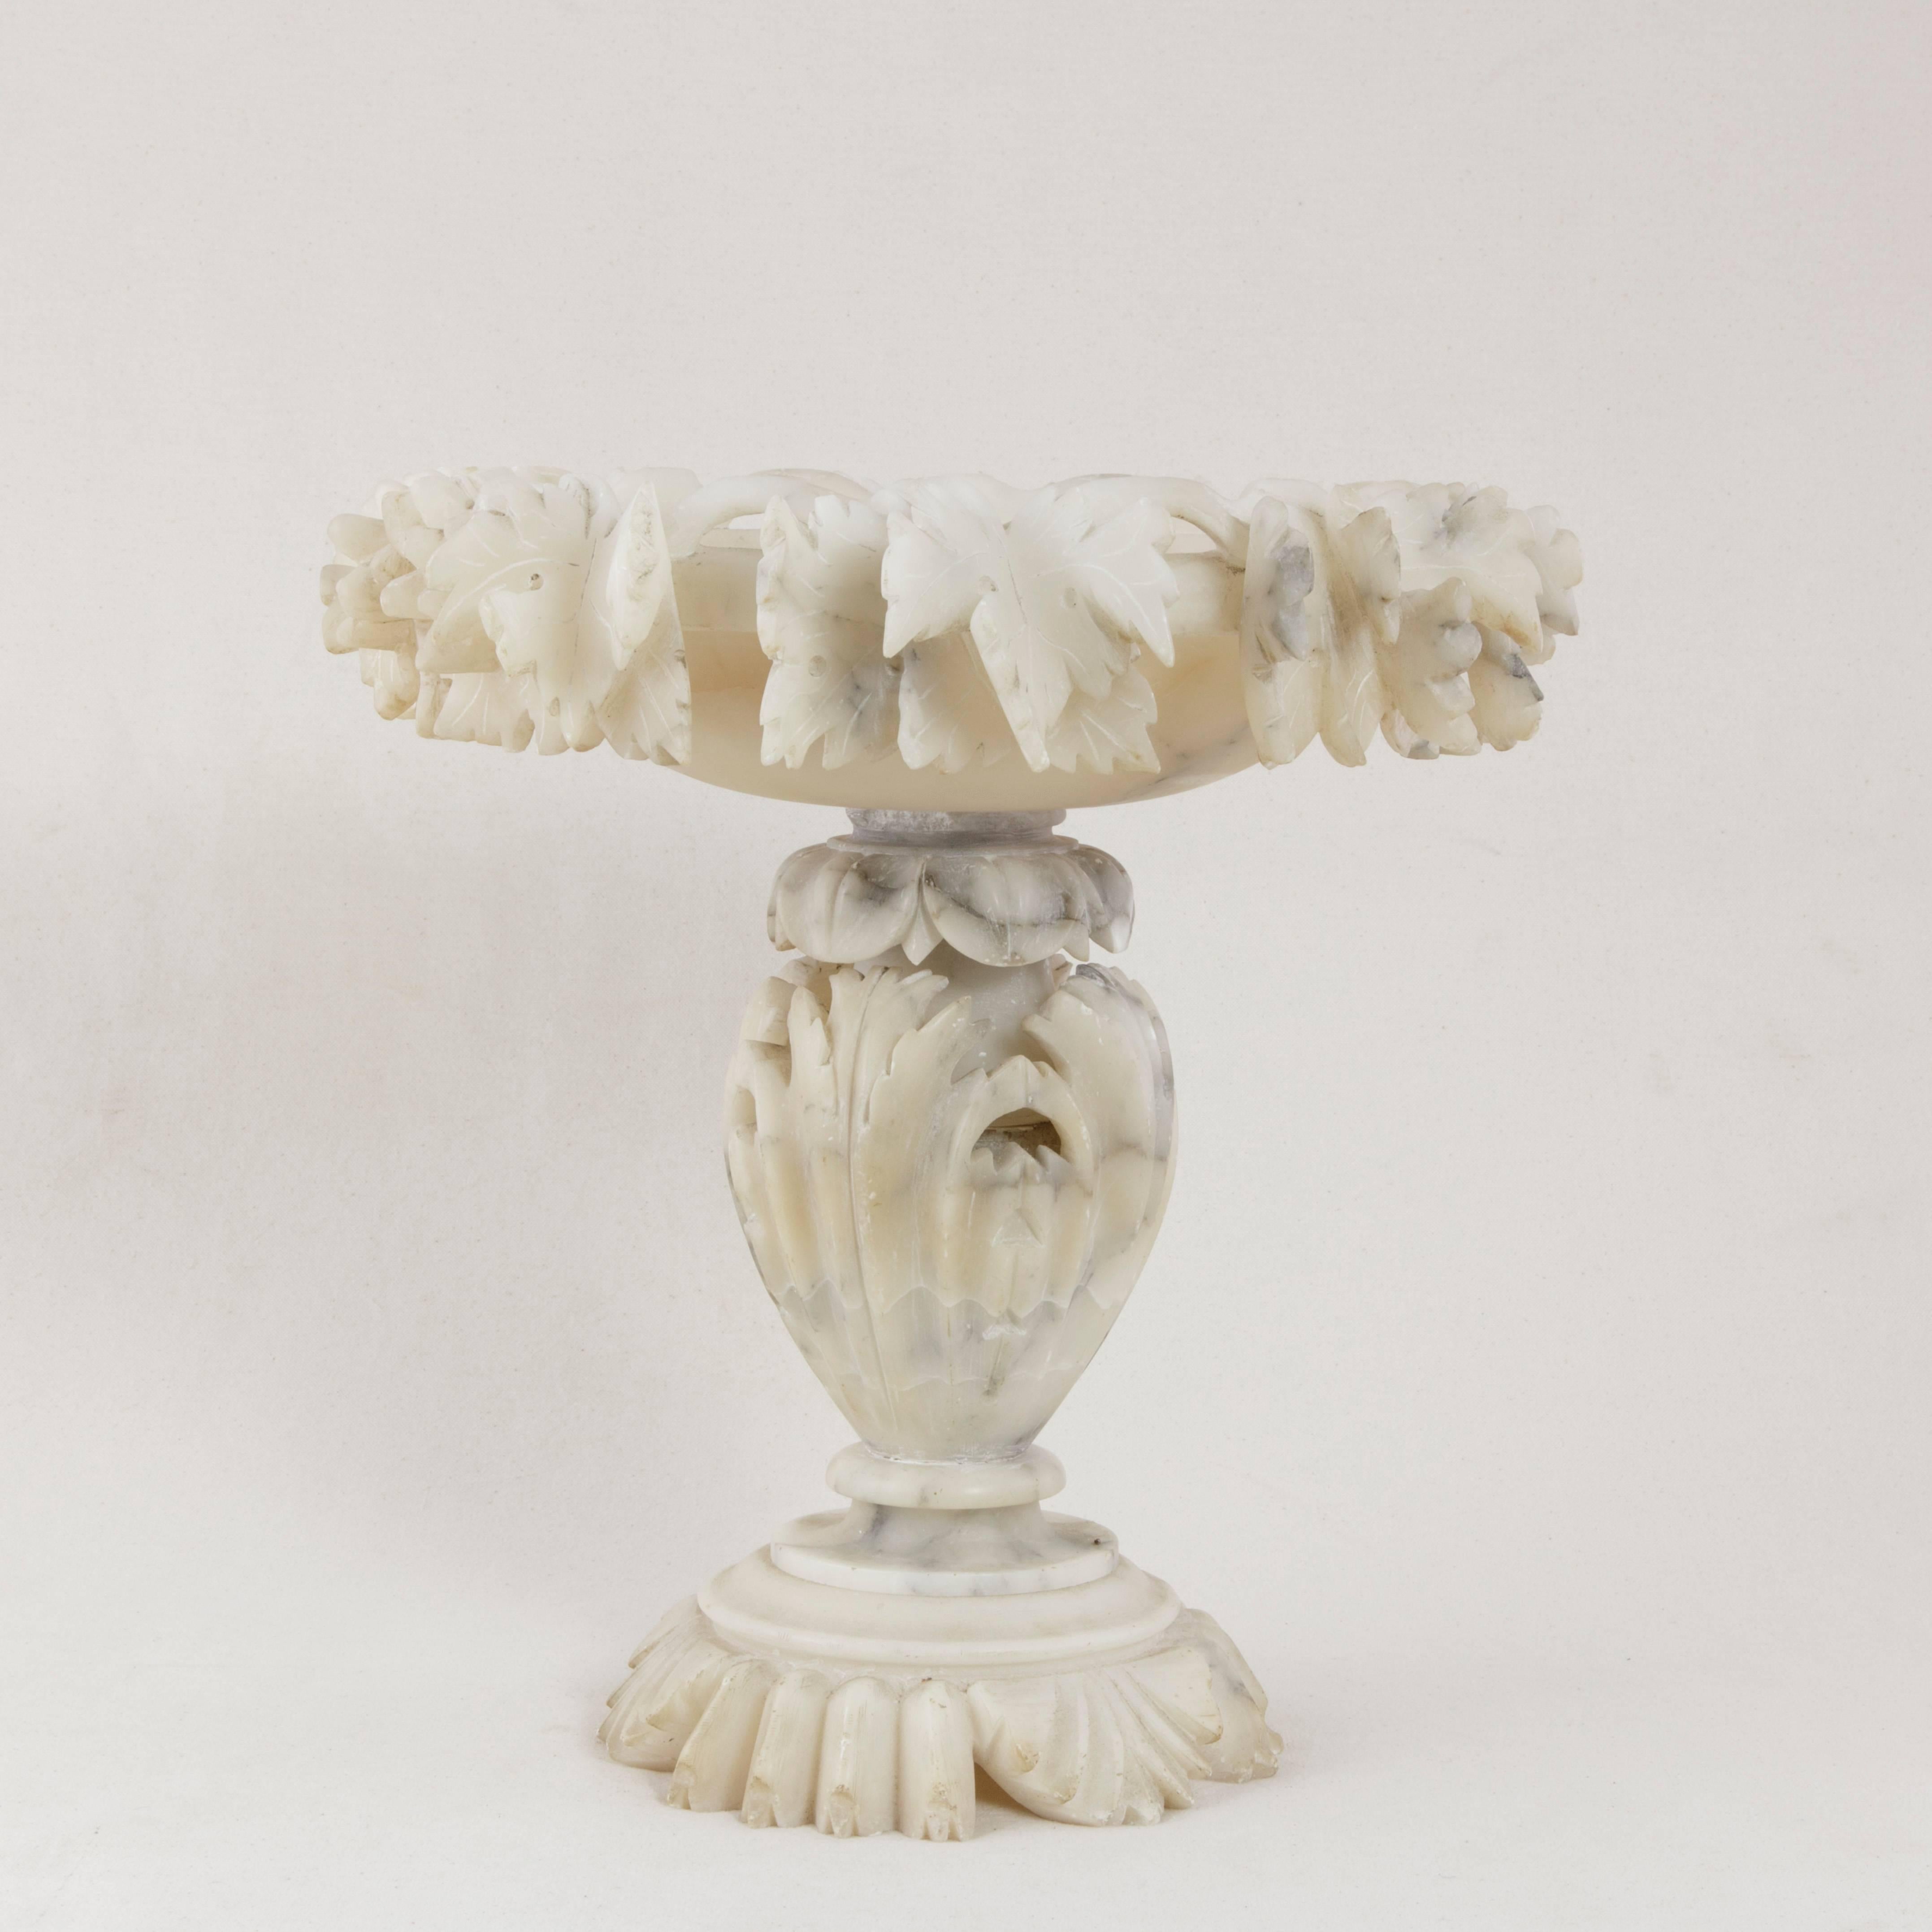 This large-scale French alabaster compote from the turn of the 20th century features deep relief hand-carved detailing of grape vines and leaves around the rim. Stylized leaves form the carved base and stem. Originally used to serve candies, fruits,